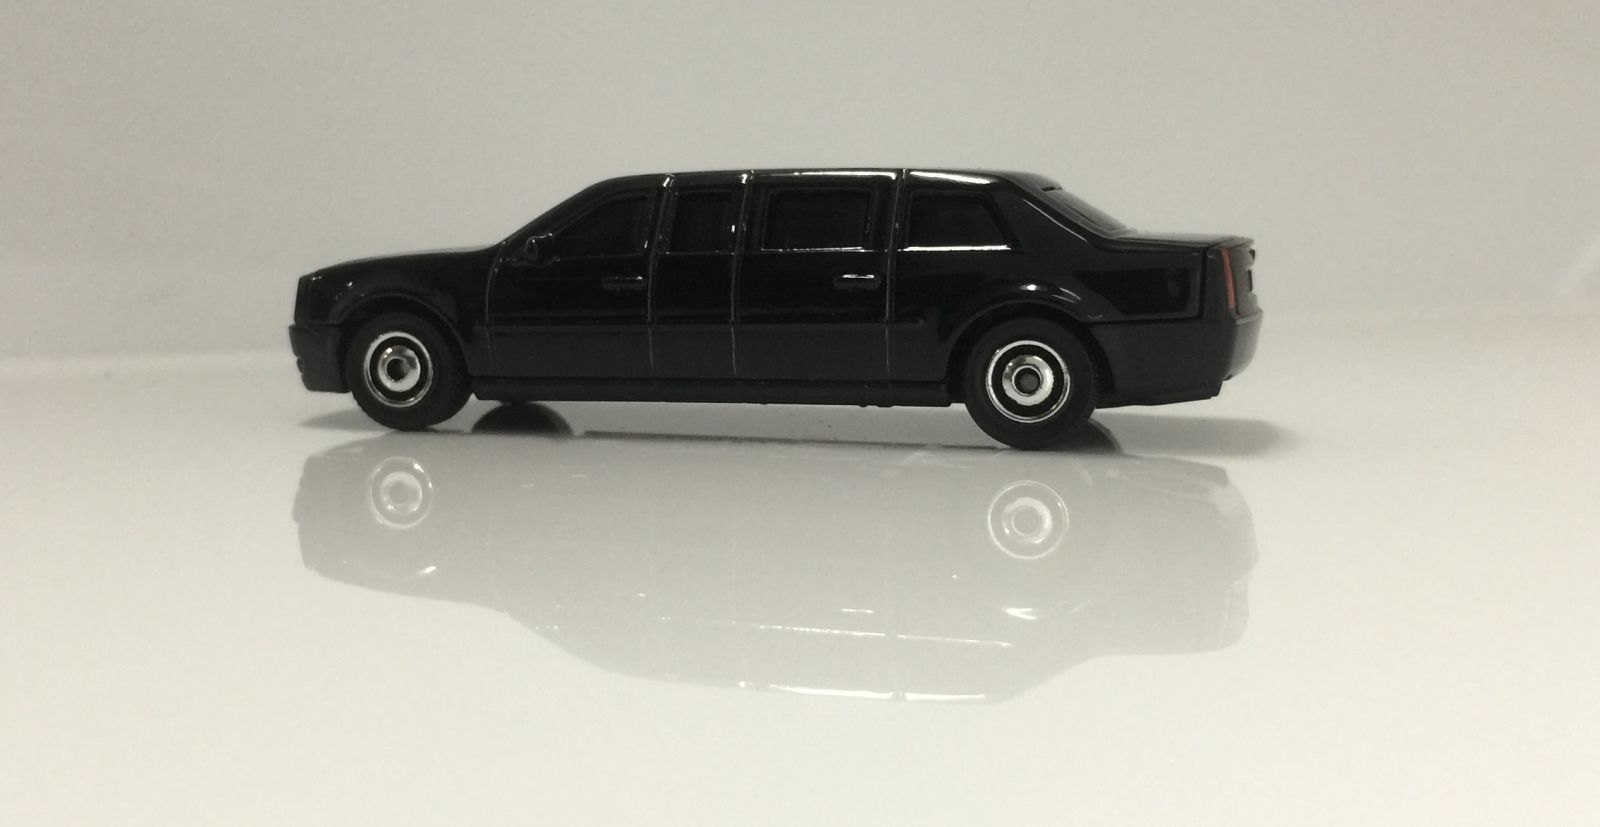 Illustration for article titled French Friday: Cadillac Limousine